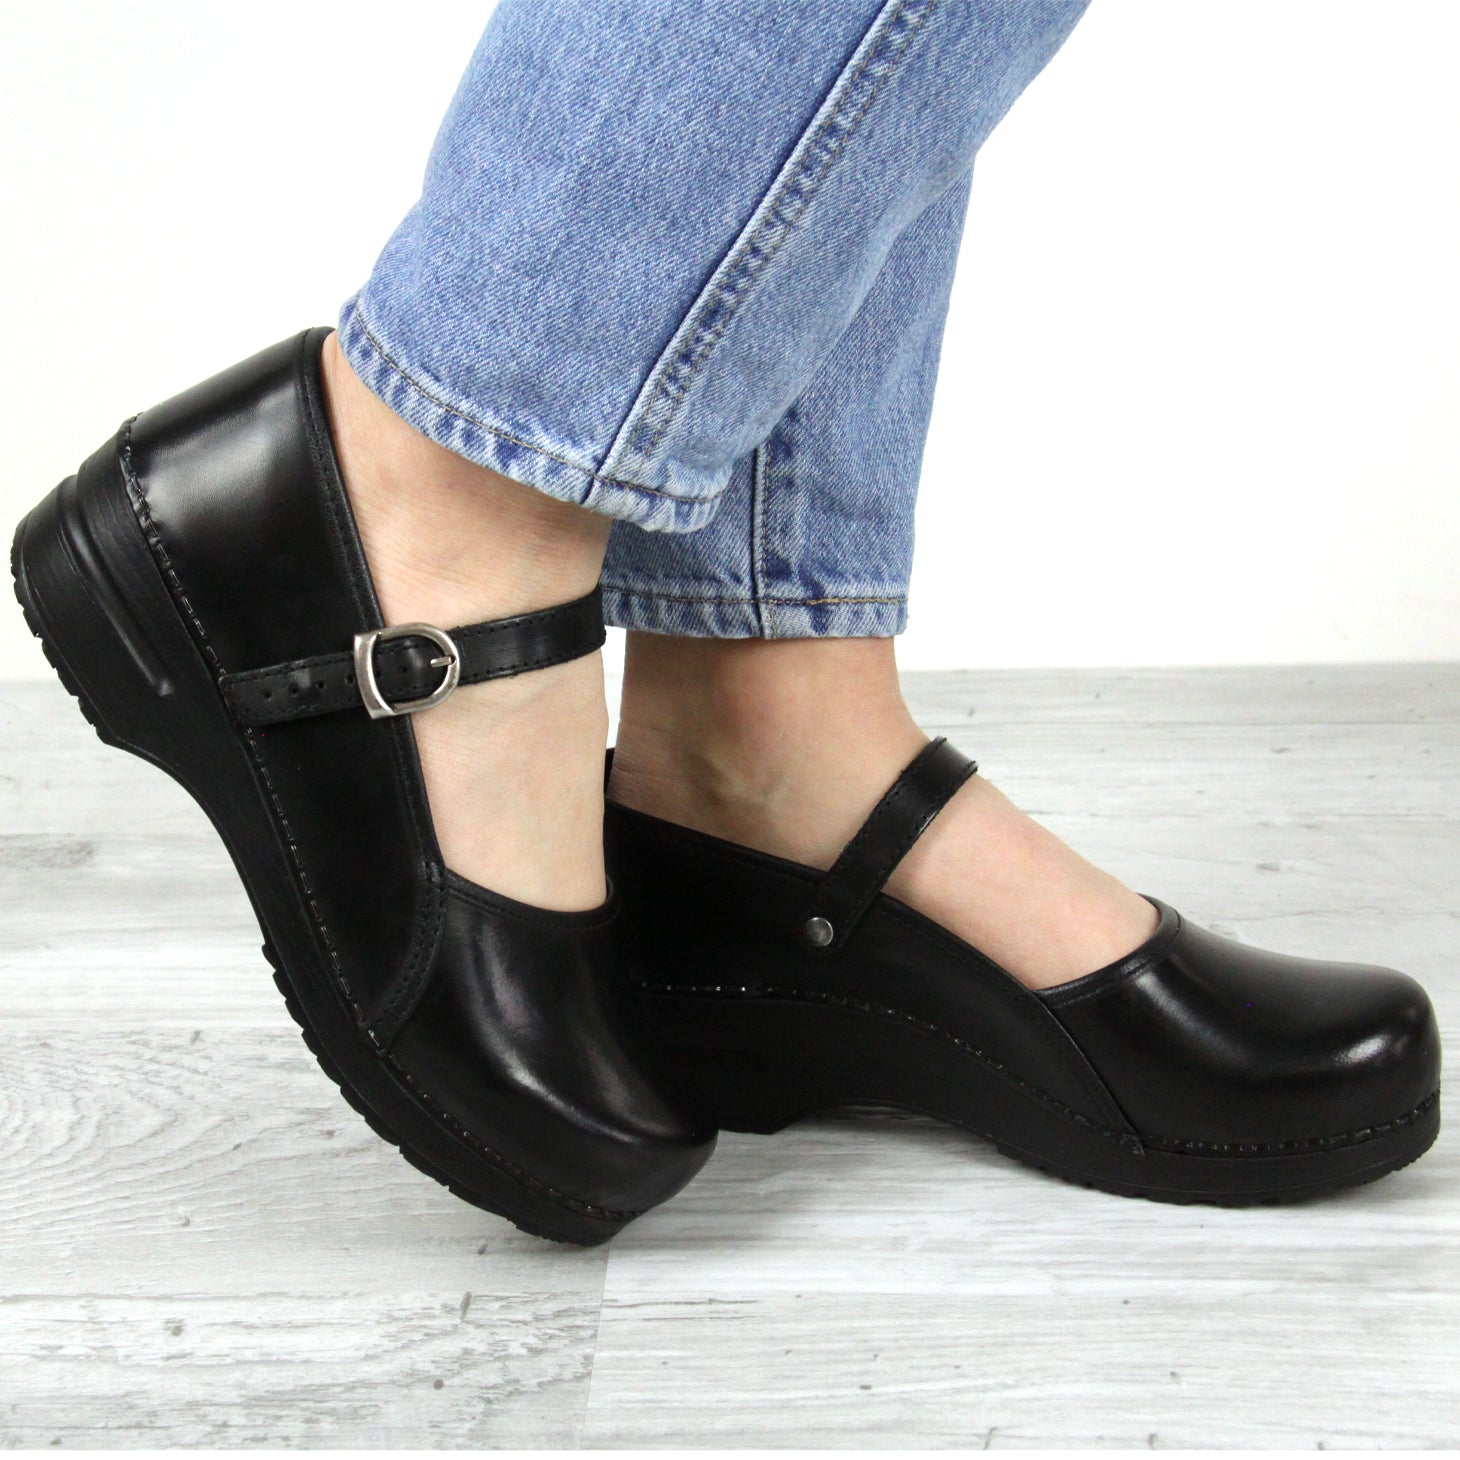 LEATHER CLOGS WITH BACK STRAP - Black